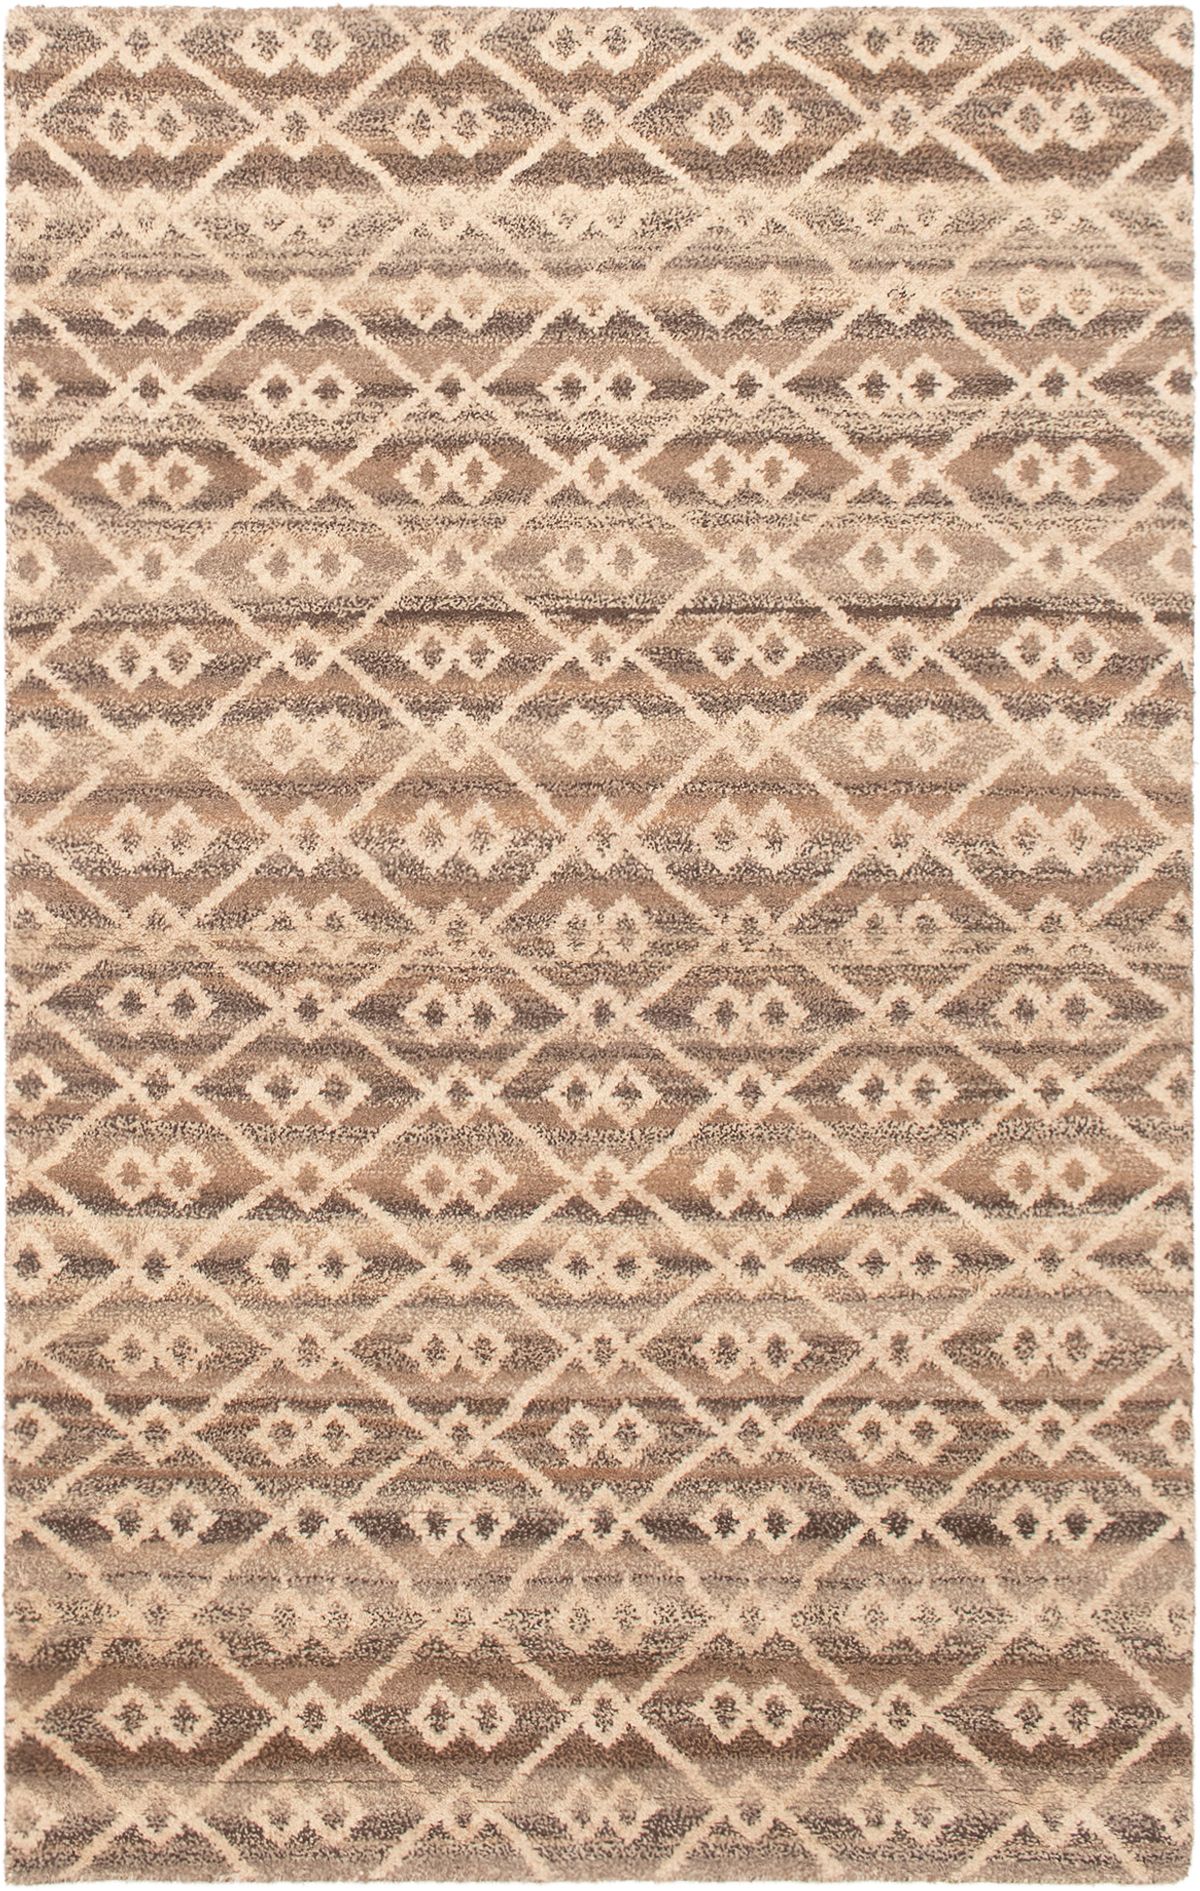 Hand-knotted Tangier Light Brown Wool Rug 5'1" x 8'1" Size: 5'1" x 8'1"  